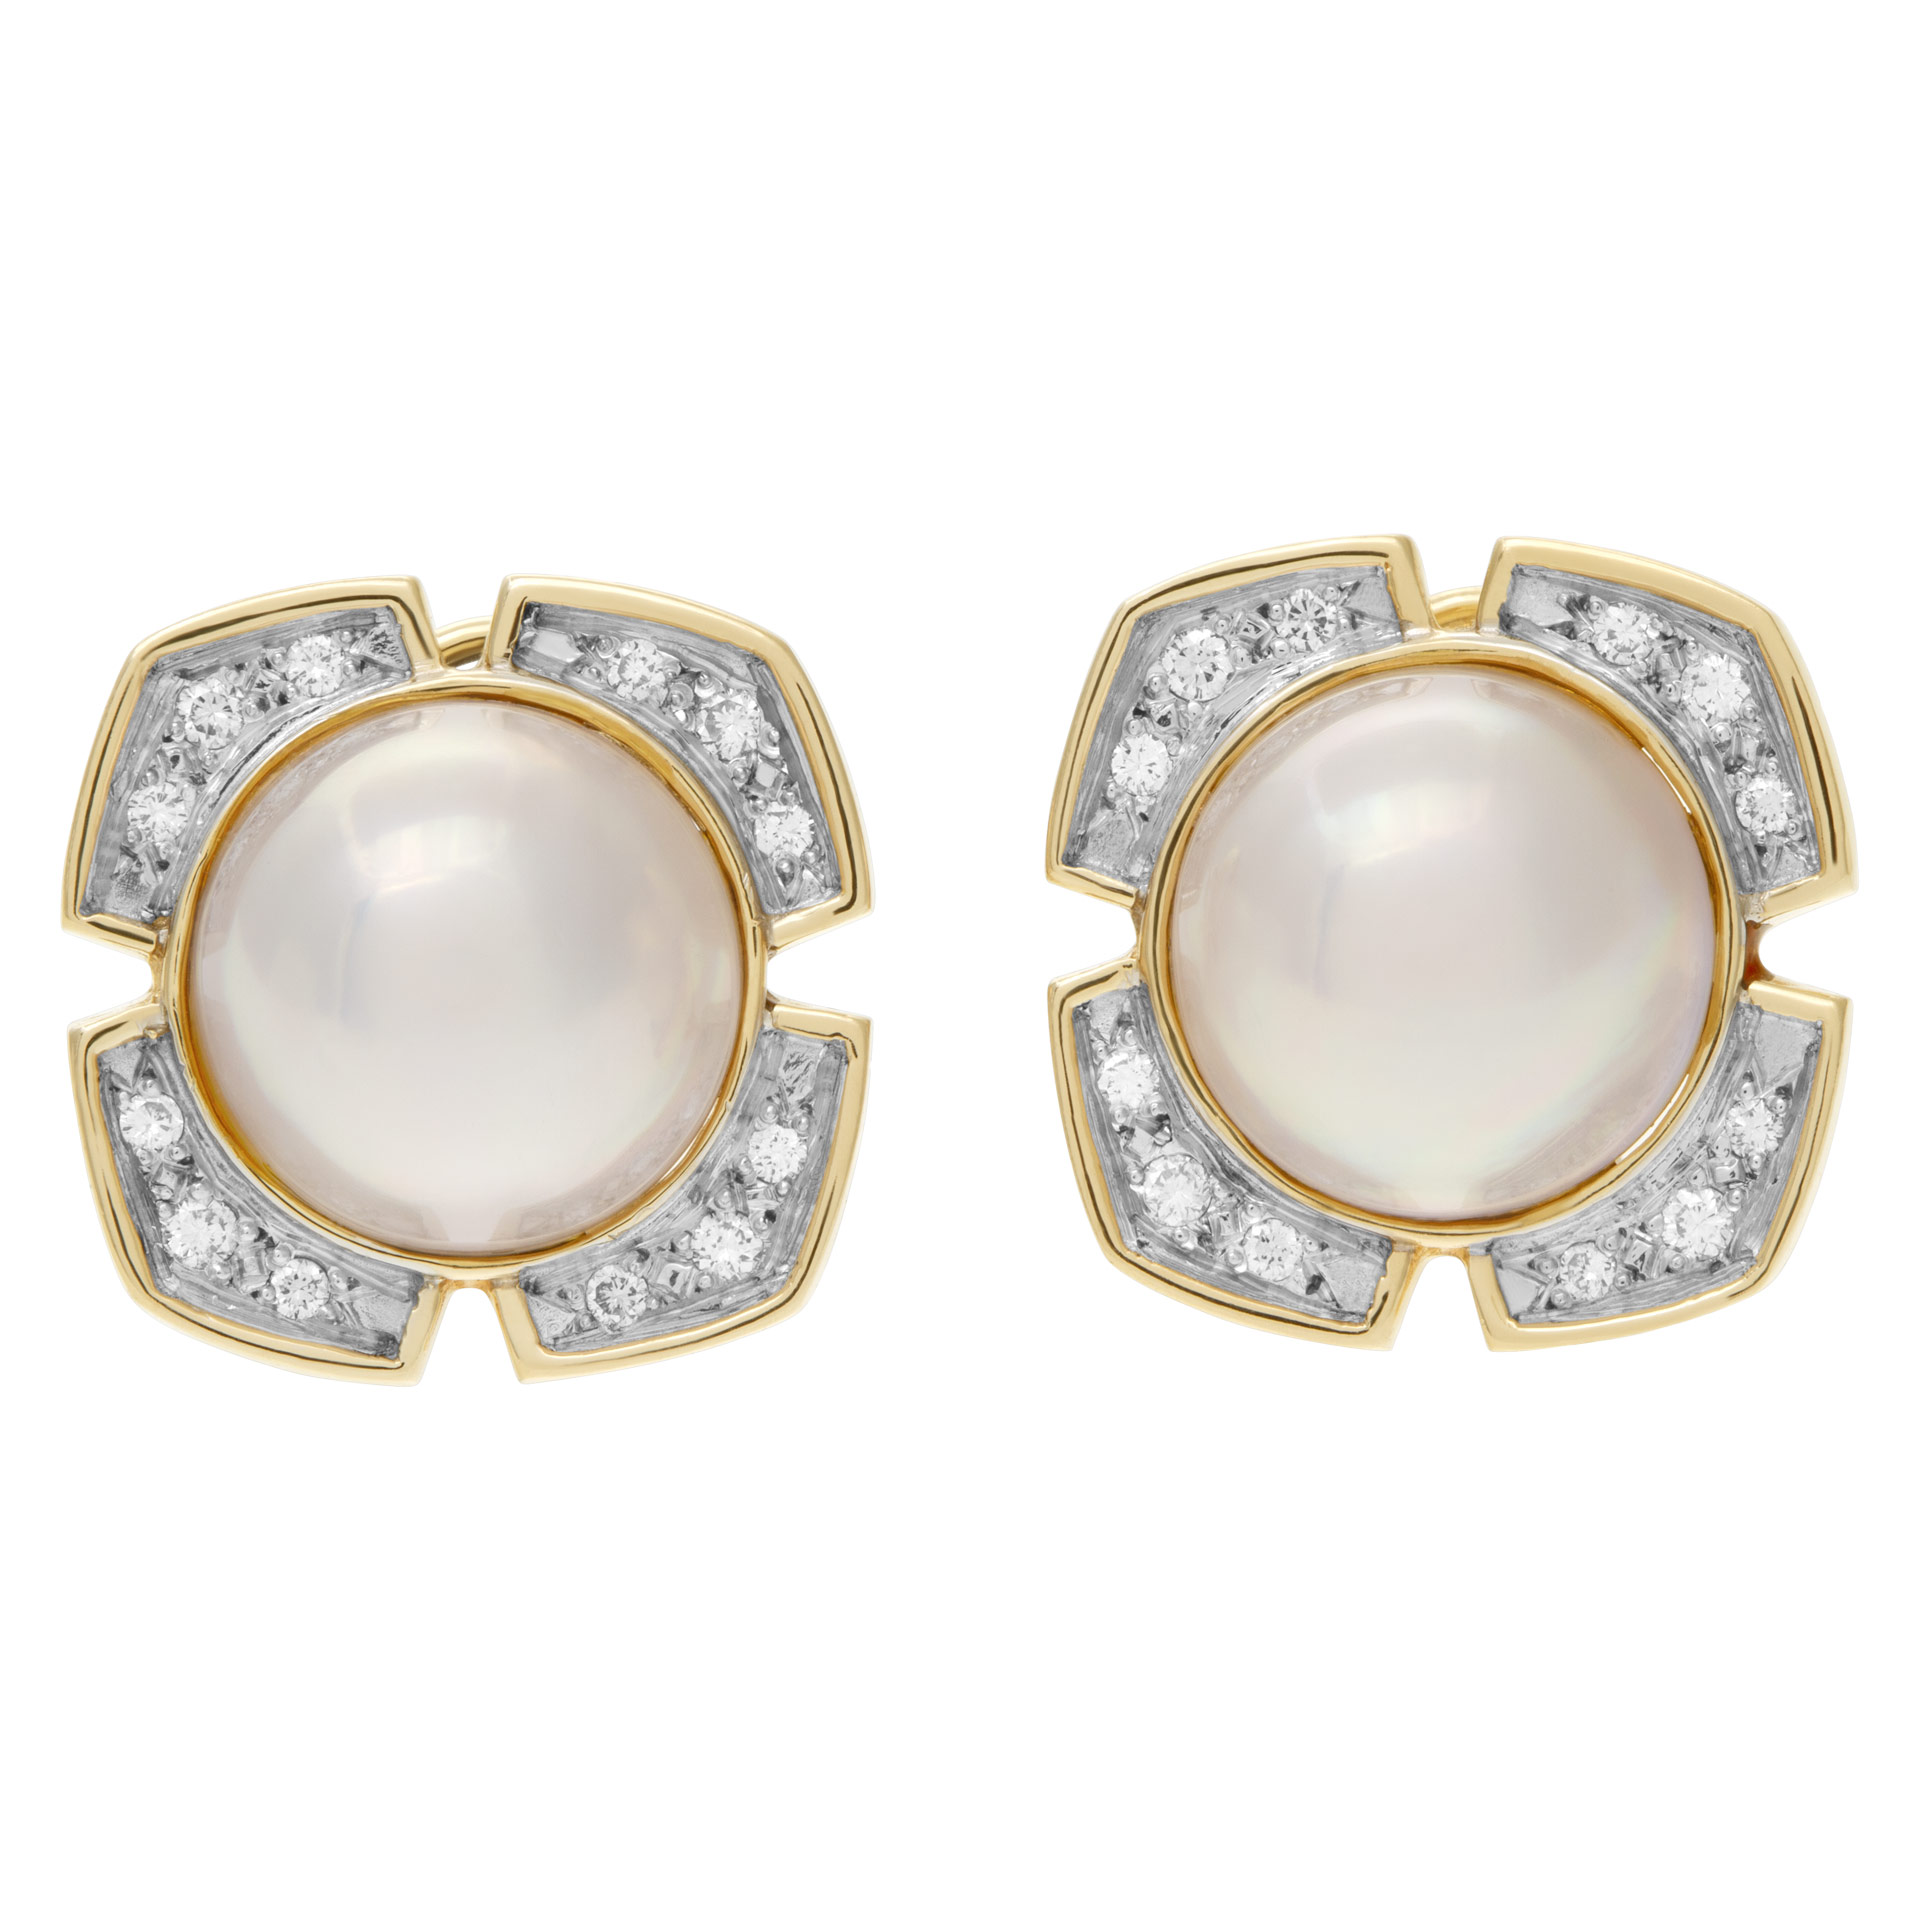 Mobe pearl earrings 13mm in 14k with diamond accents image 1